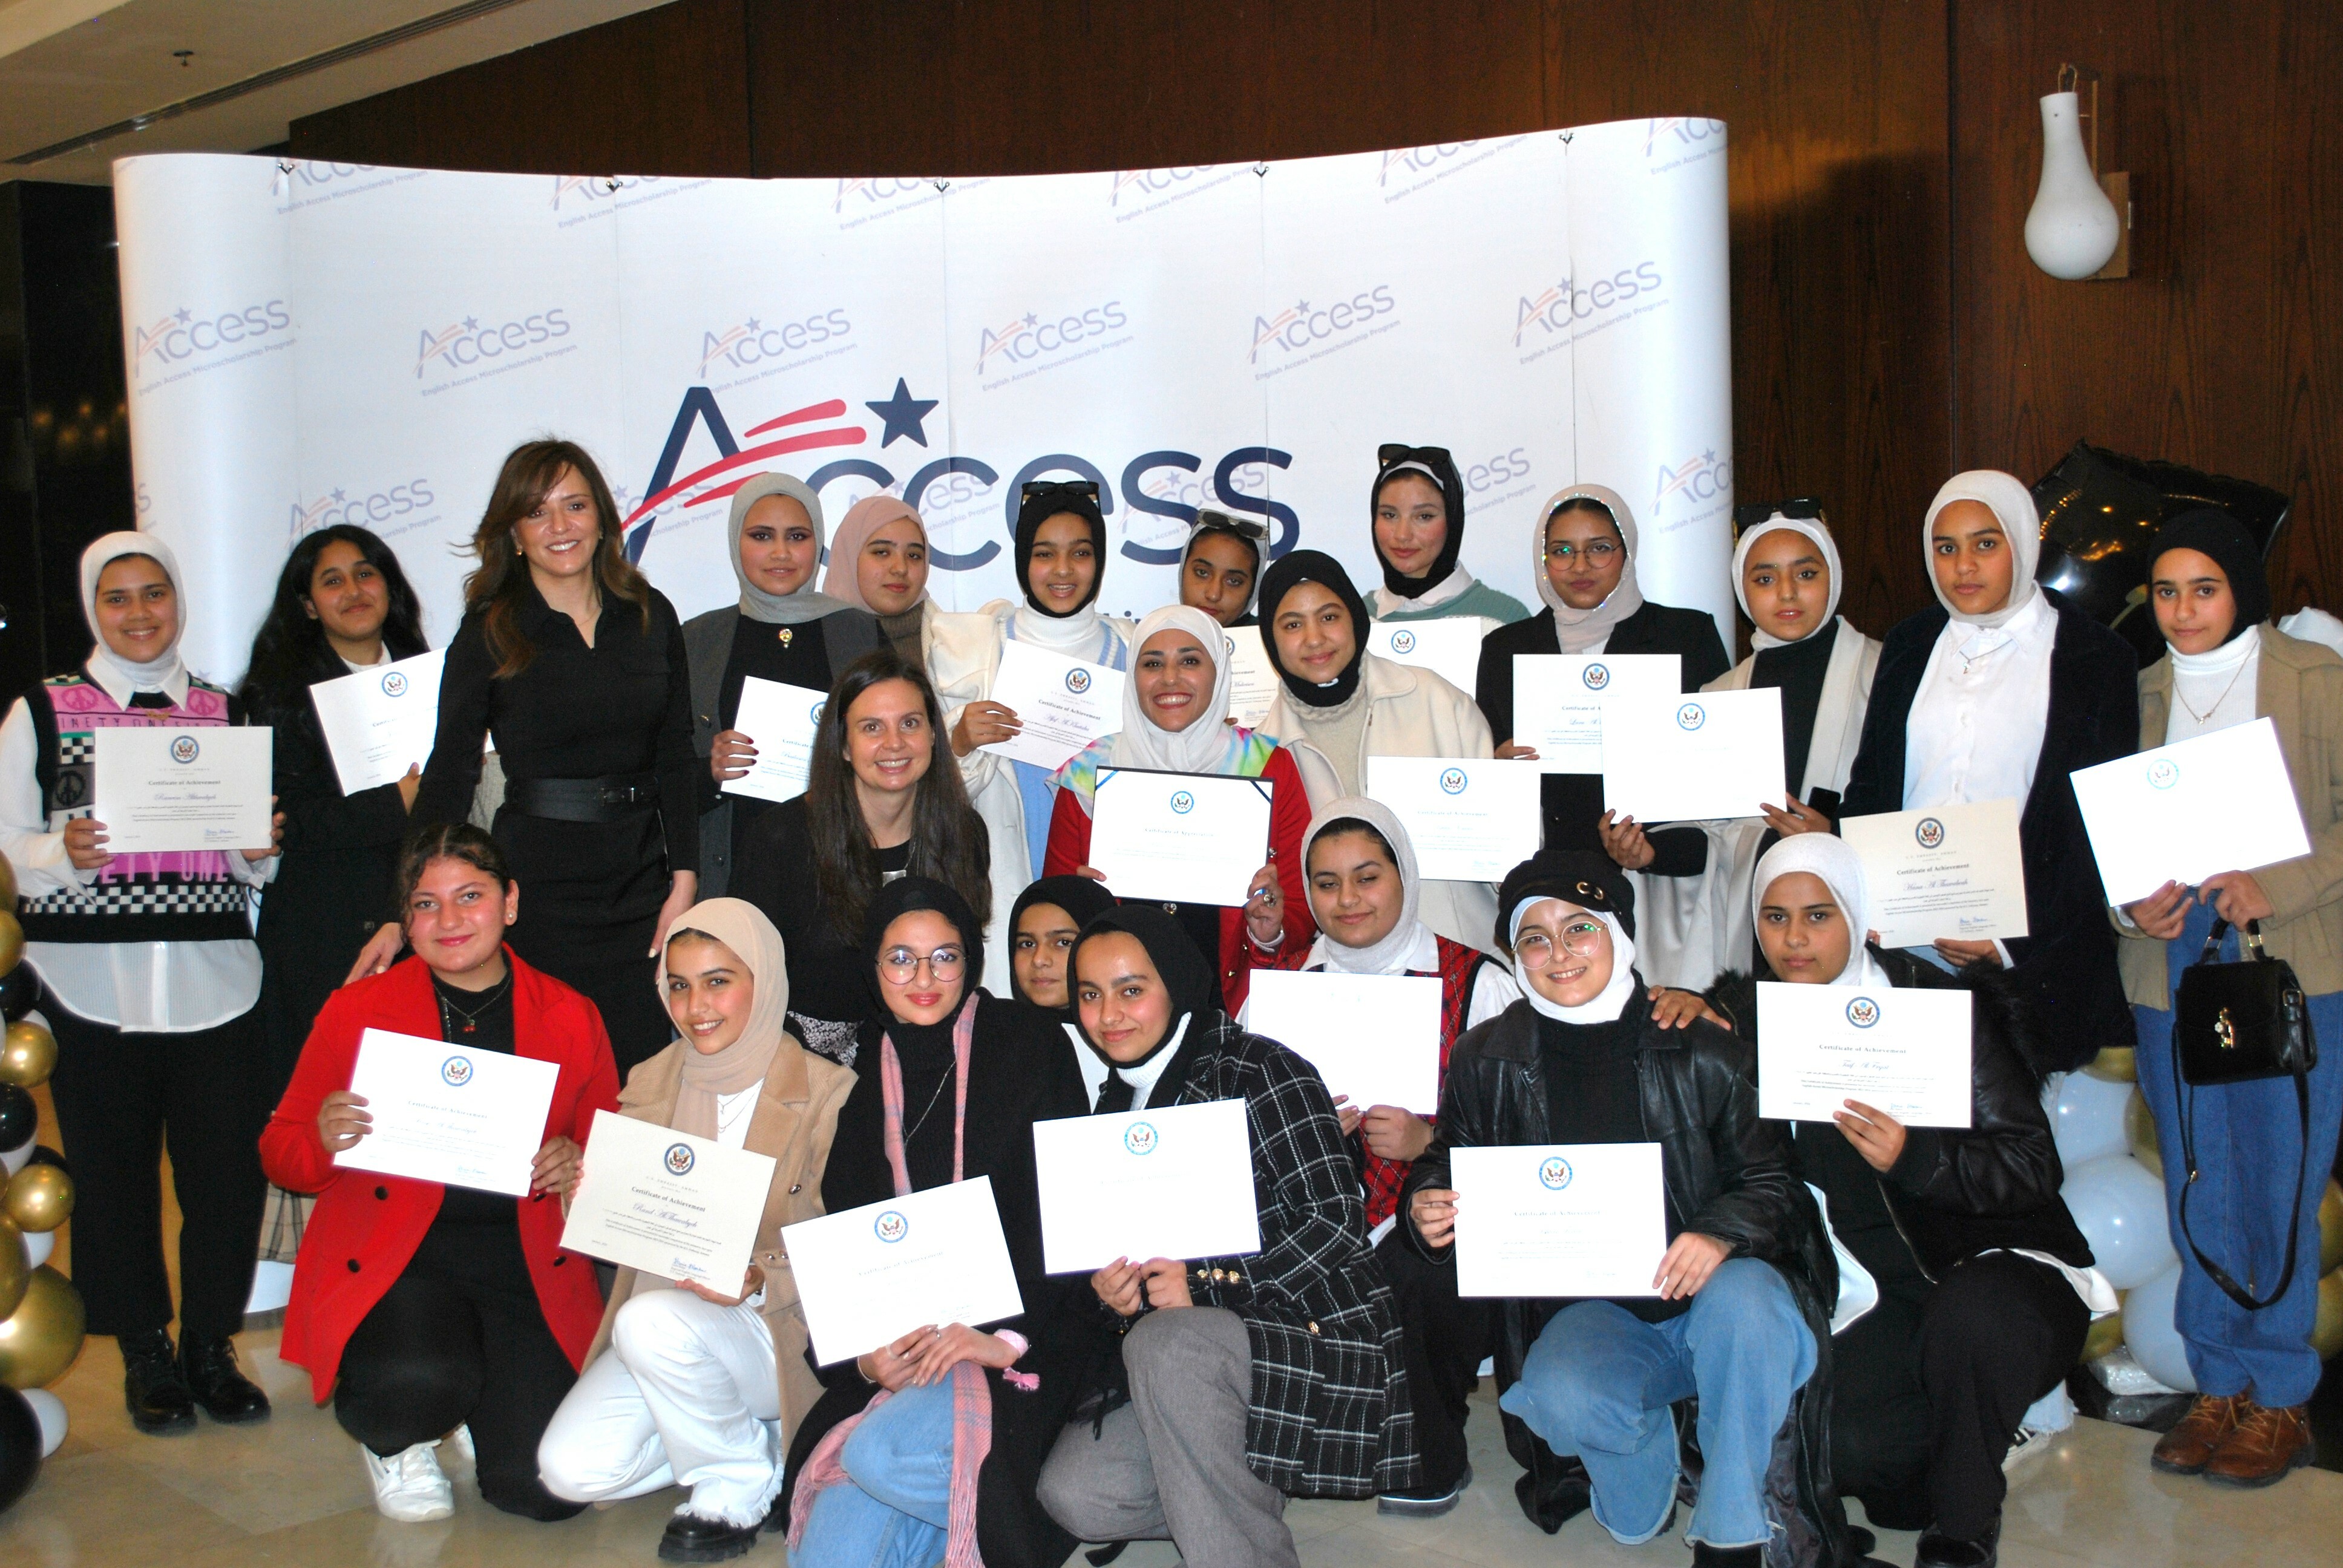 A large group of young women holding certificates